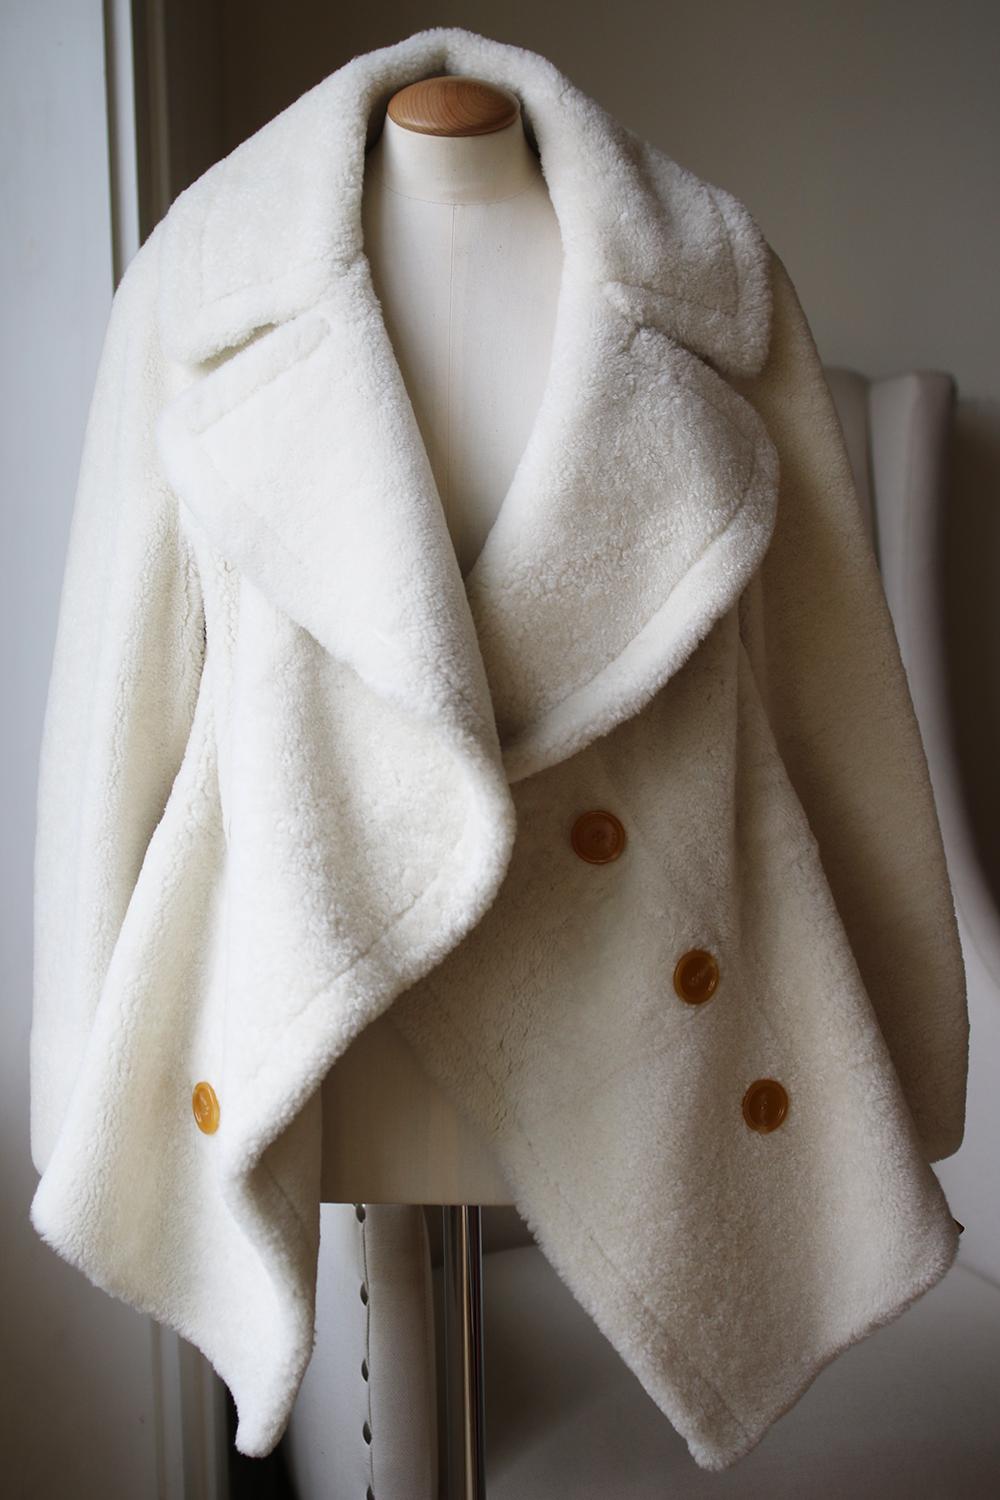 This Burberry's coat is inspired by the curved lines of Henry Moore's sculpture. It's made from thick, cozy cream shearling and has an oversized collar that falls into a softly draped front. The cotton-blend cable-knit back creates a sumptuous